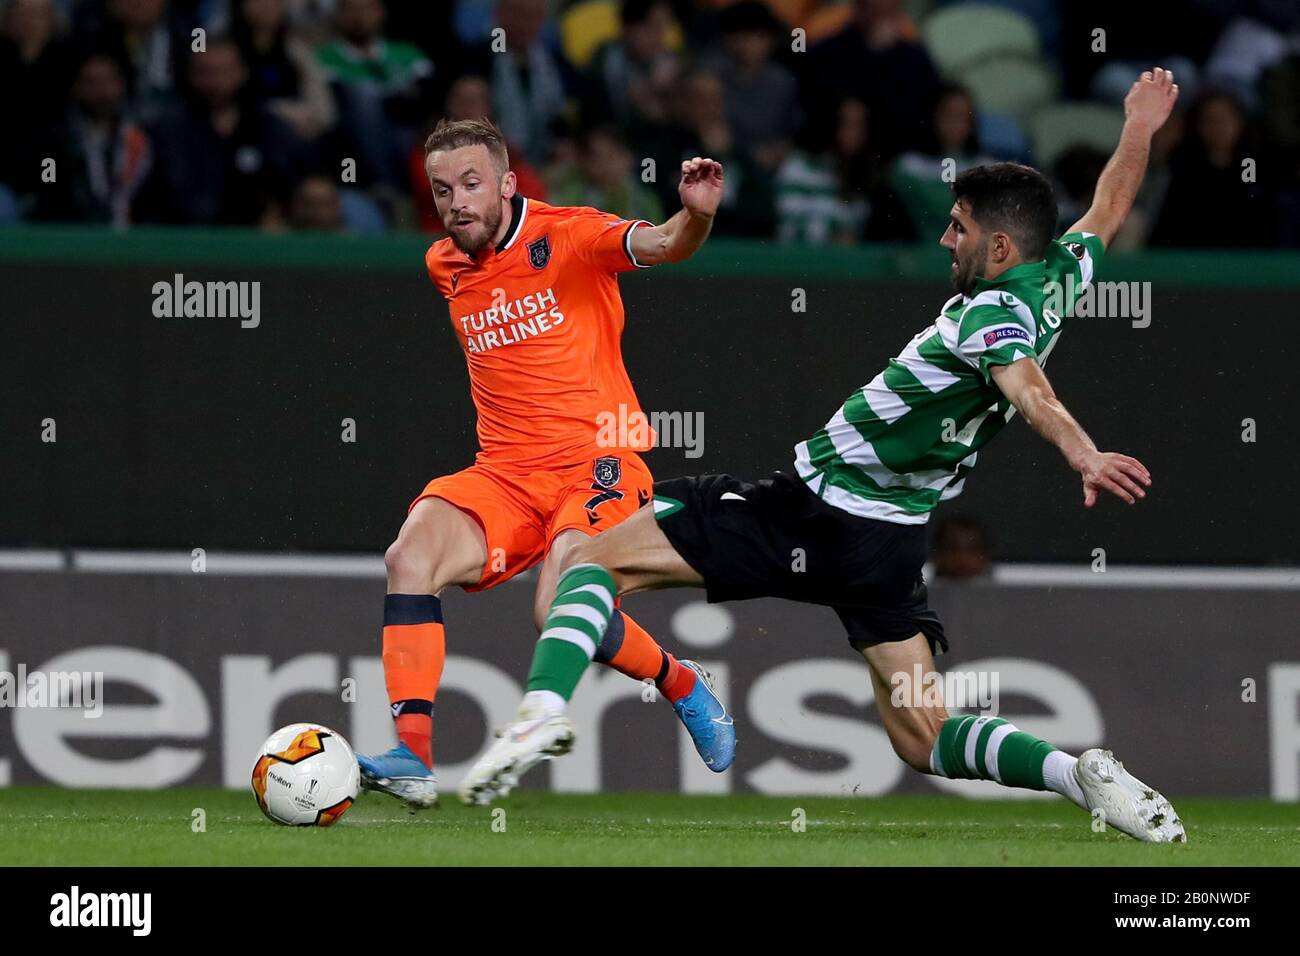 Lisbon, Portugal. 20th Feb, 2020. Edin Visca of Istanbul Basaksehir (L) vies with Luis Neto of Sporting CP during the UEFA Europa League round of 32 first leg football match between Sporting CP and Istanbul Basaksehir at Alvalade stadium in Lisbon, Portugal, on Feb. 20, 2020. Credit: Pedro Fiuza/Xinhua/Alamy Live News Stock Photo